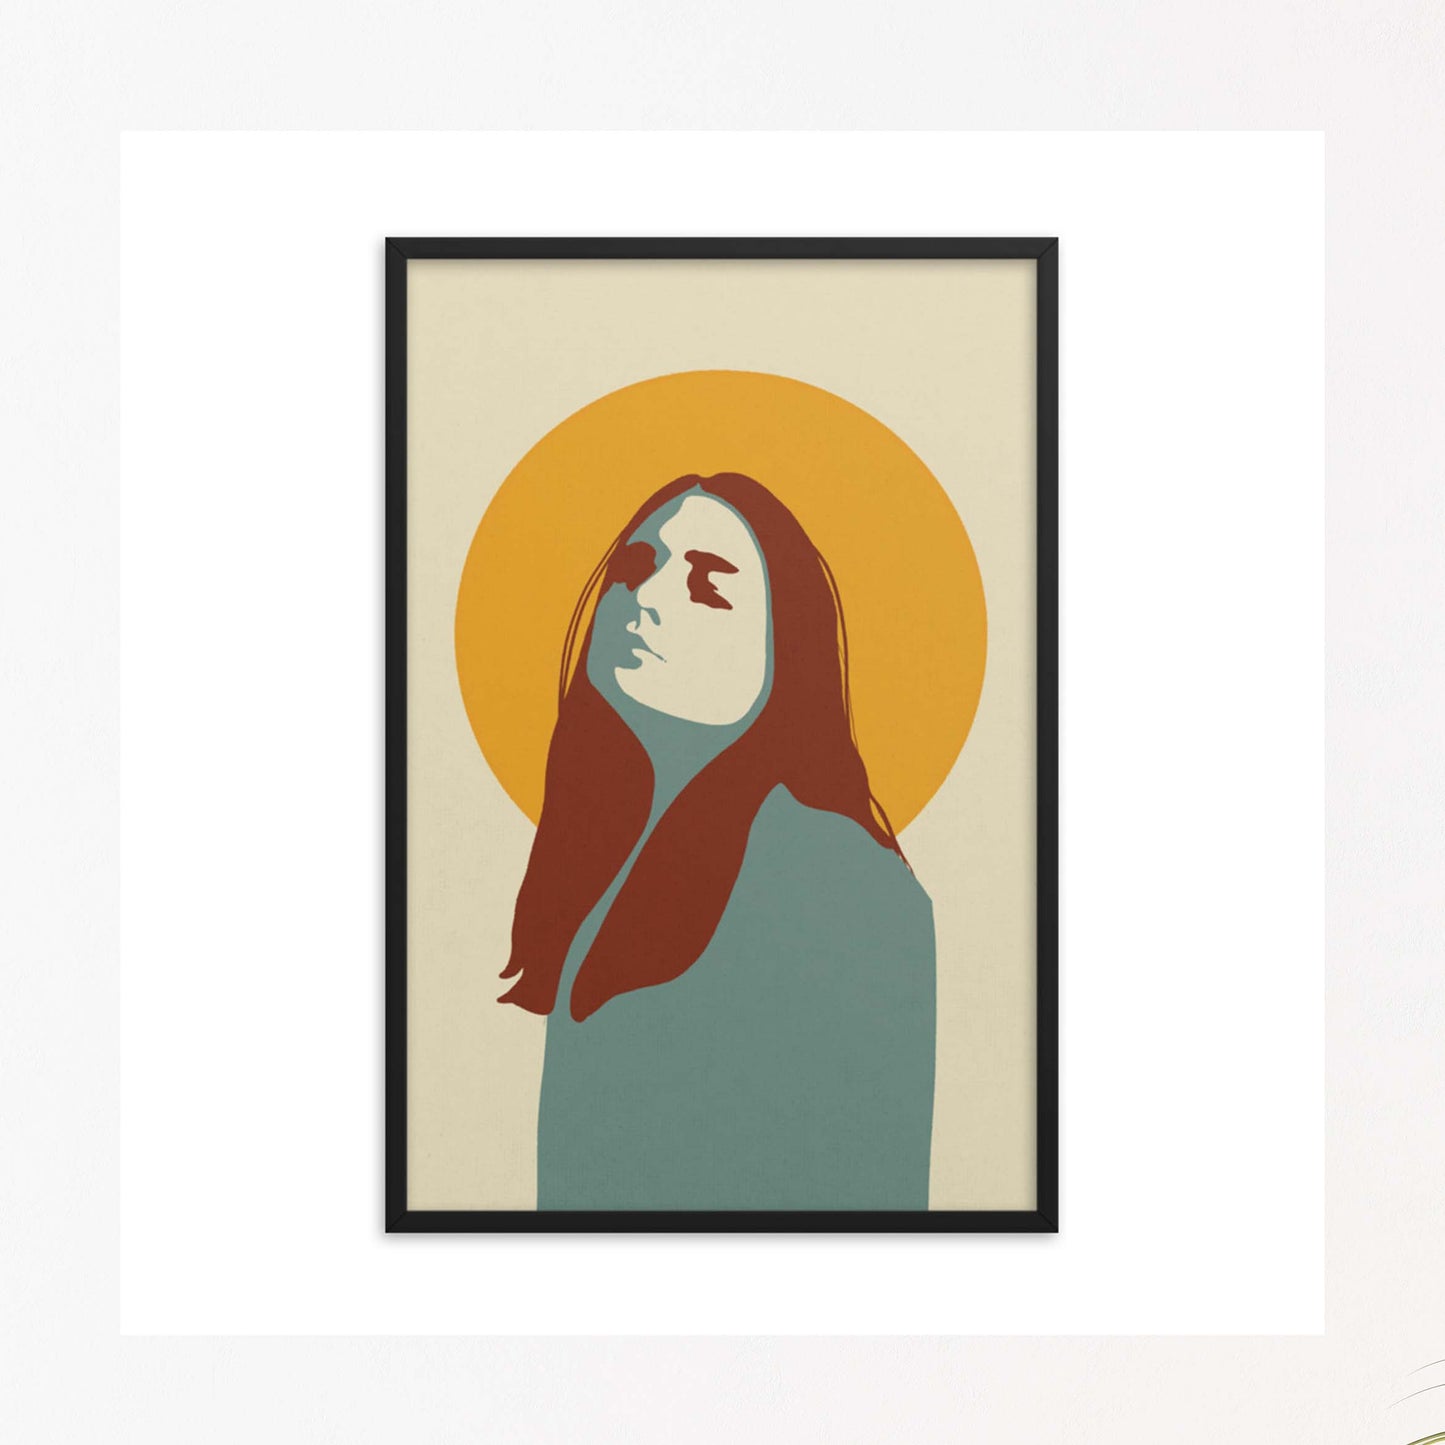 Abstract Portrait for a strong confident woman with sun illustration poster in black frame.